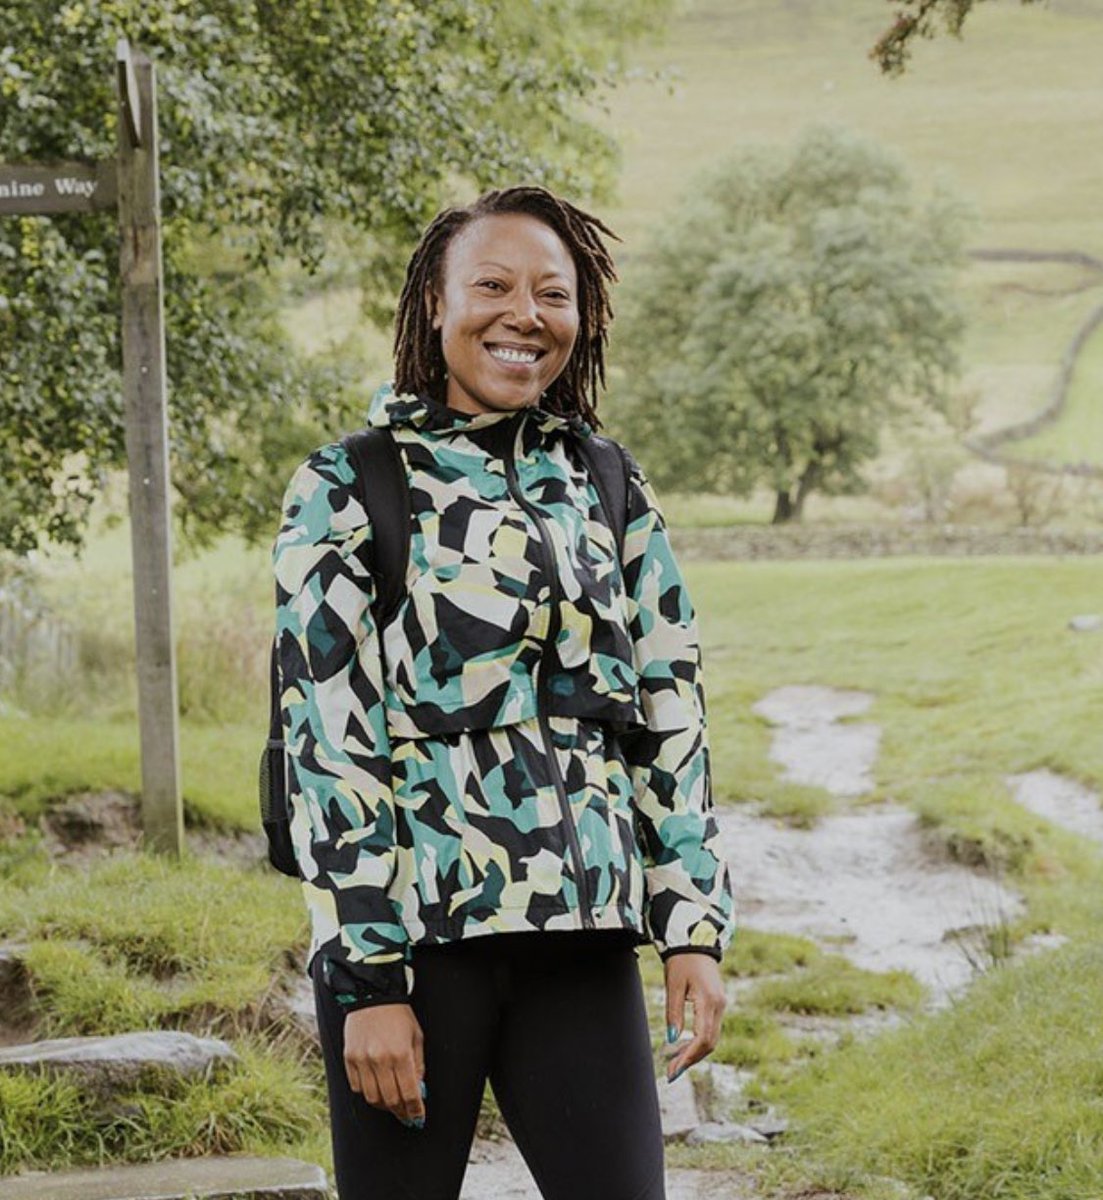 We're very proud to announce that our founder Rhiane Fatinikun has been awarded an MBE for services to Nature and Diversity!! Congratulations Rhiane ✨

#NewYearHonours #honourslist